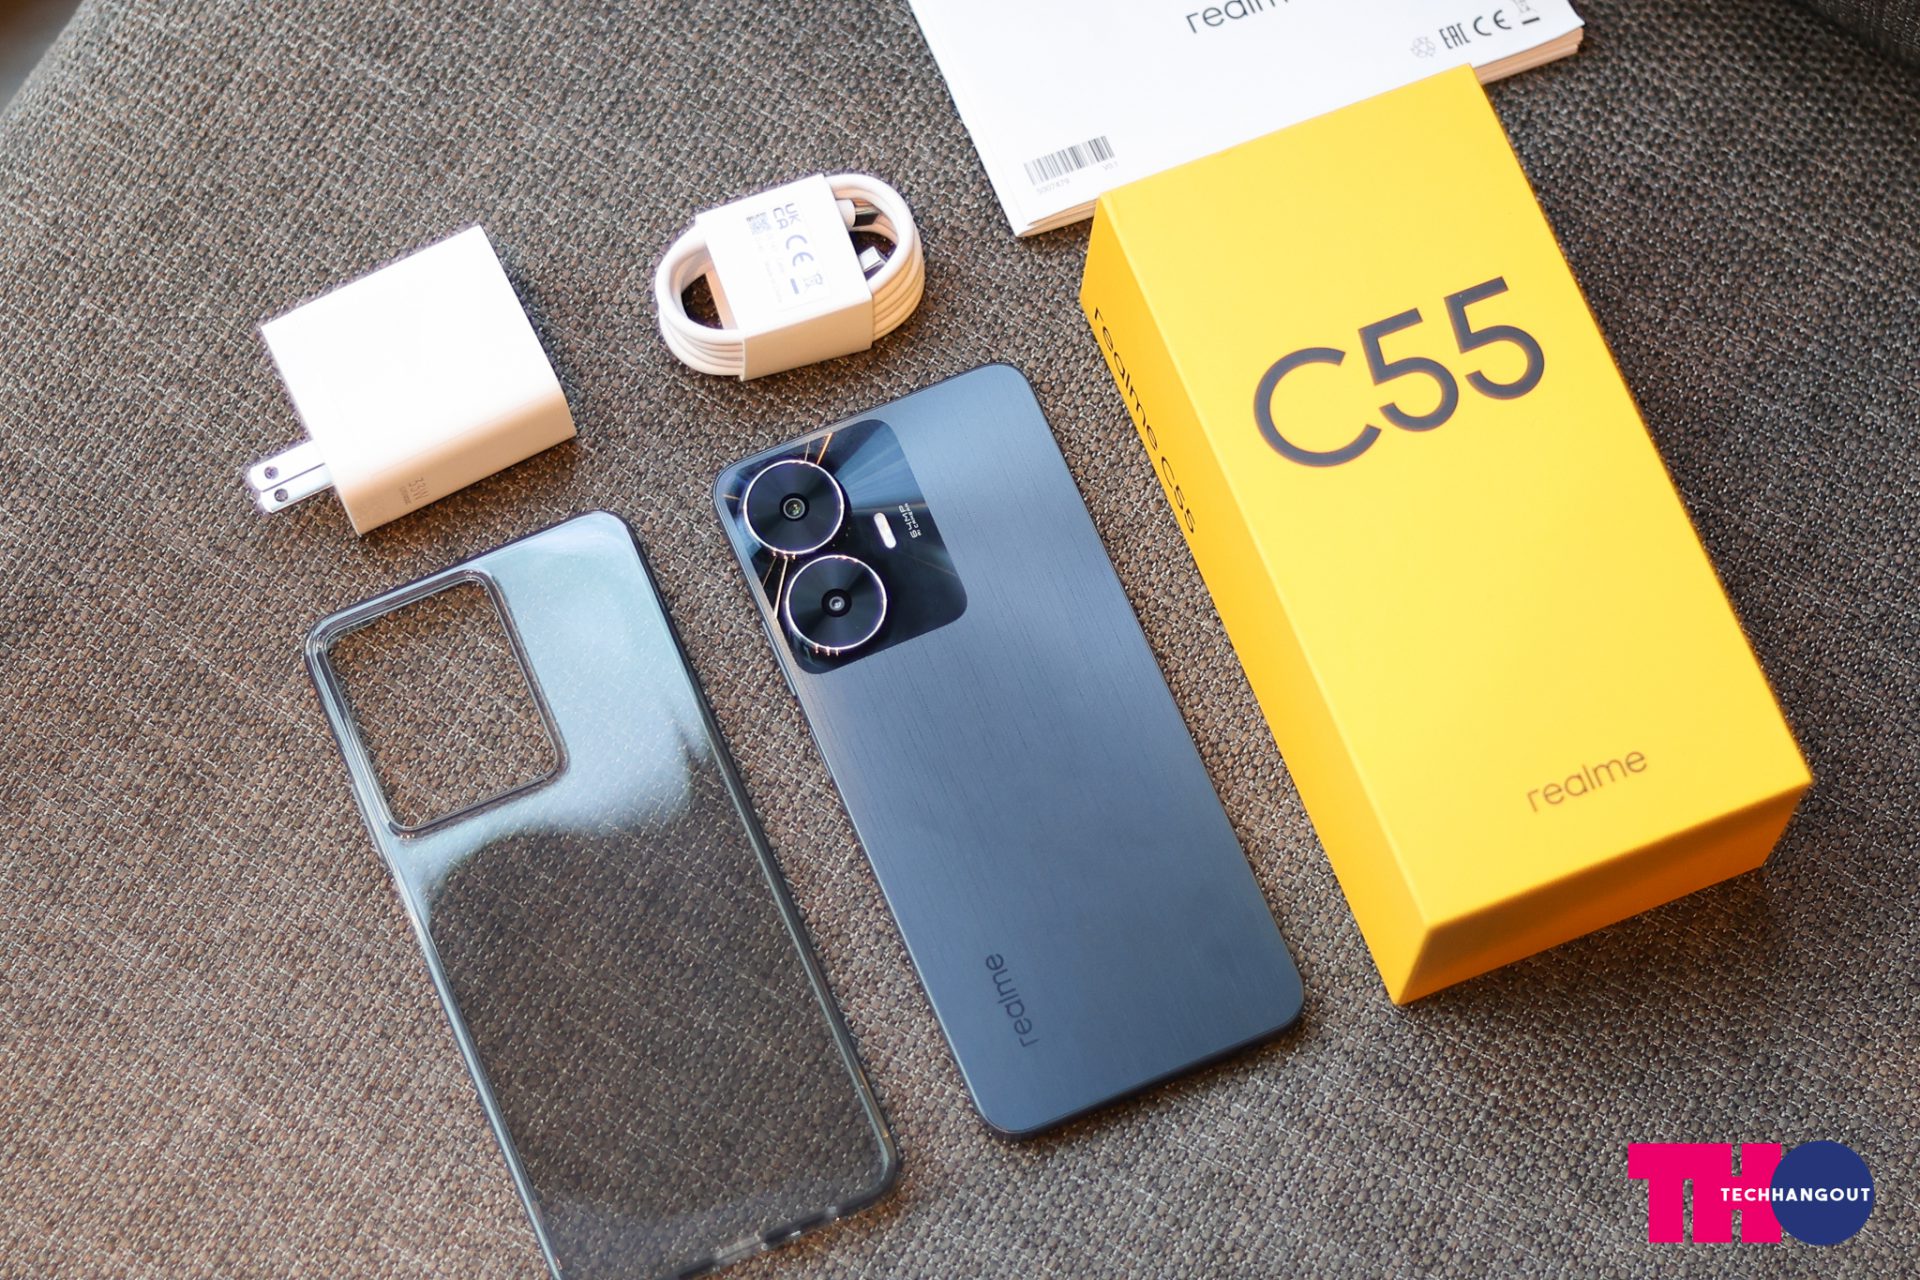 On hand realme C55 super product Dynamic Island like iPhone 14 Pro priced at only 4 million VND